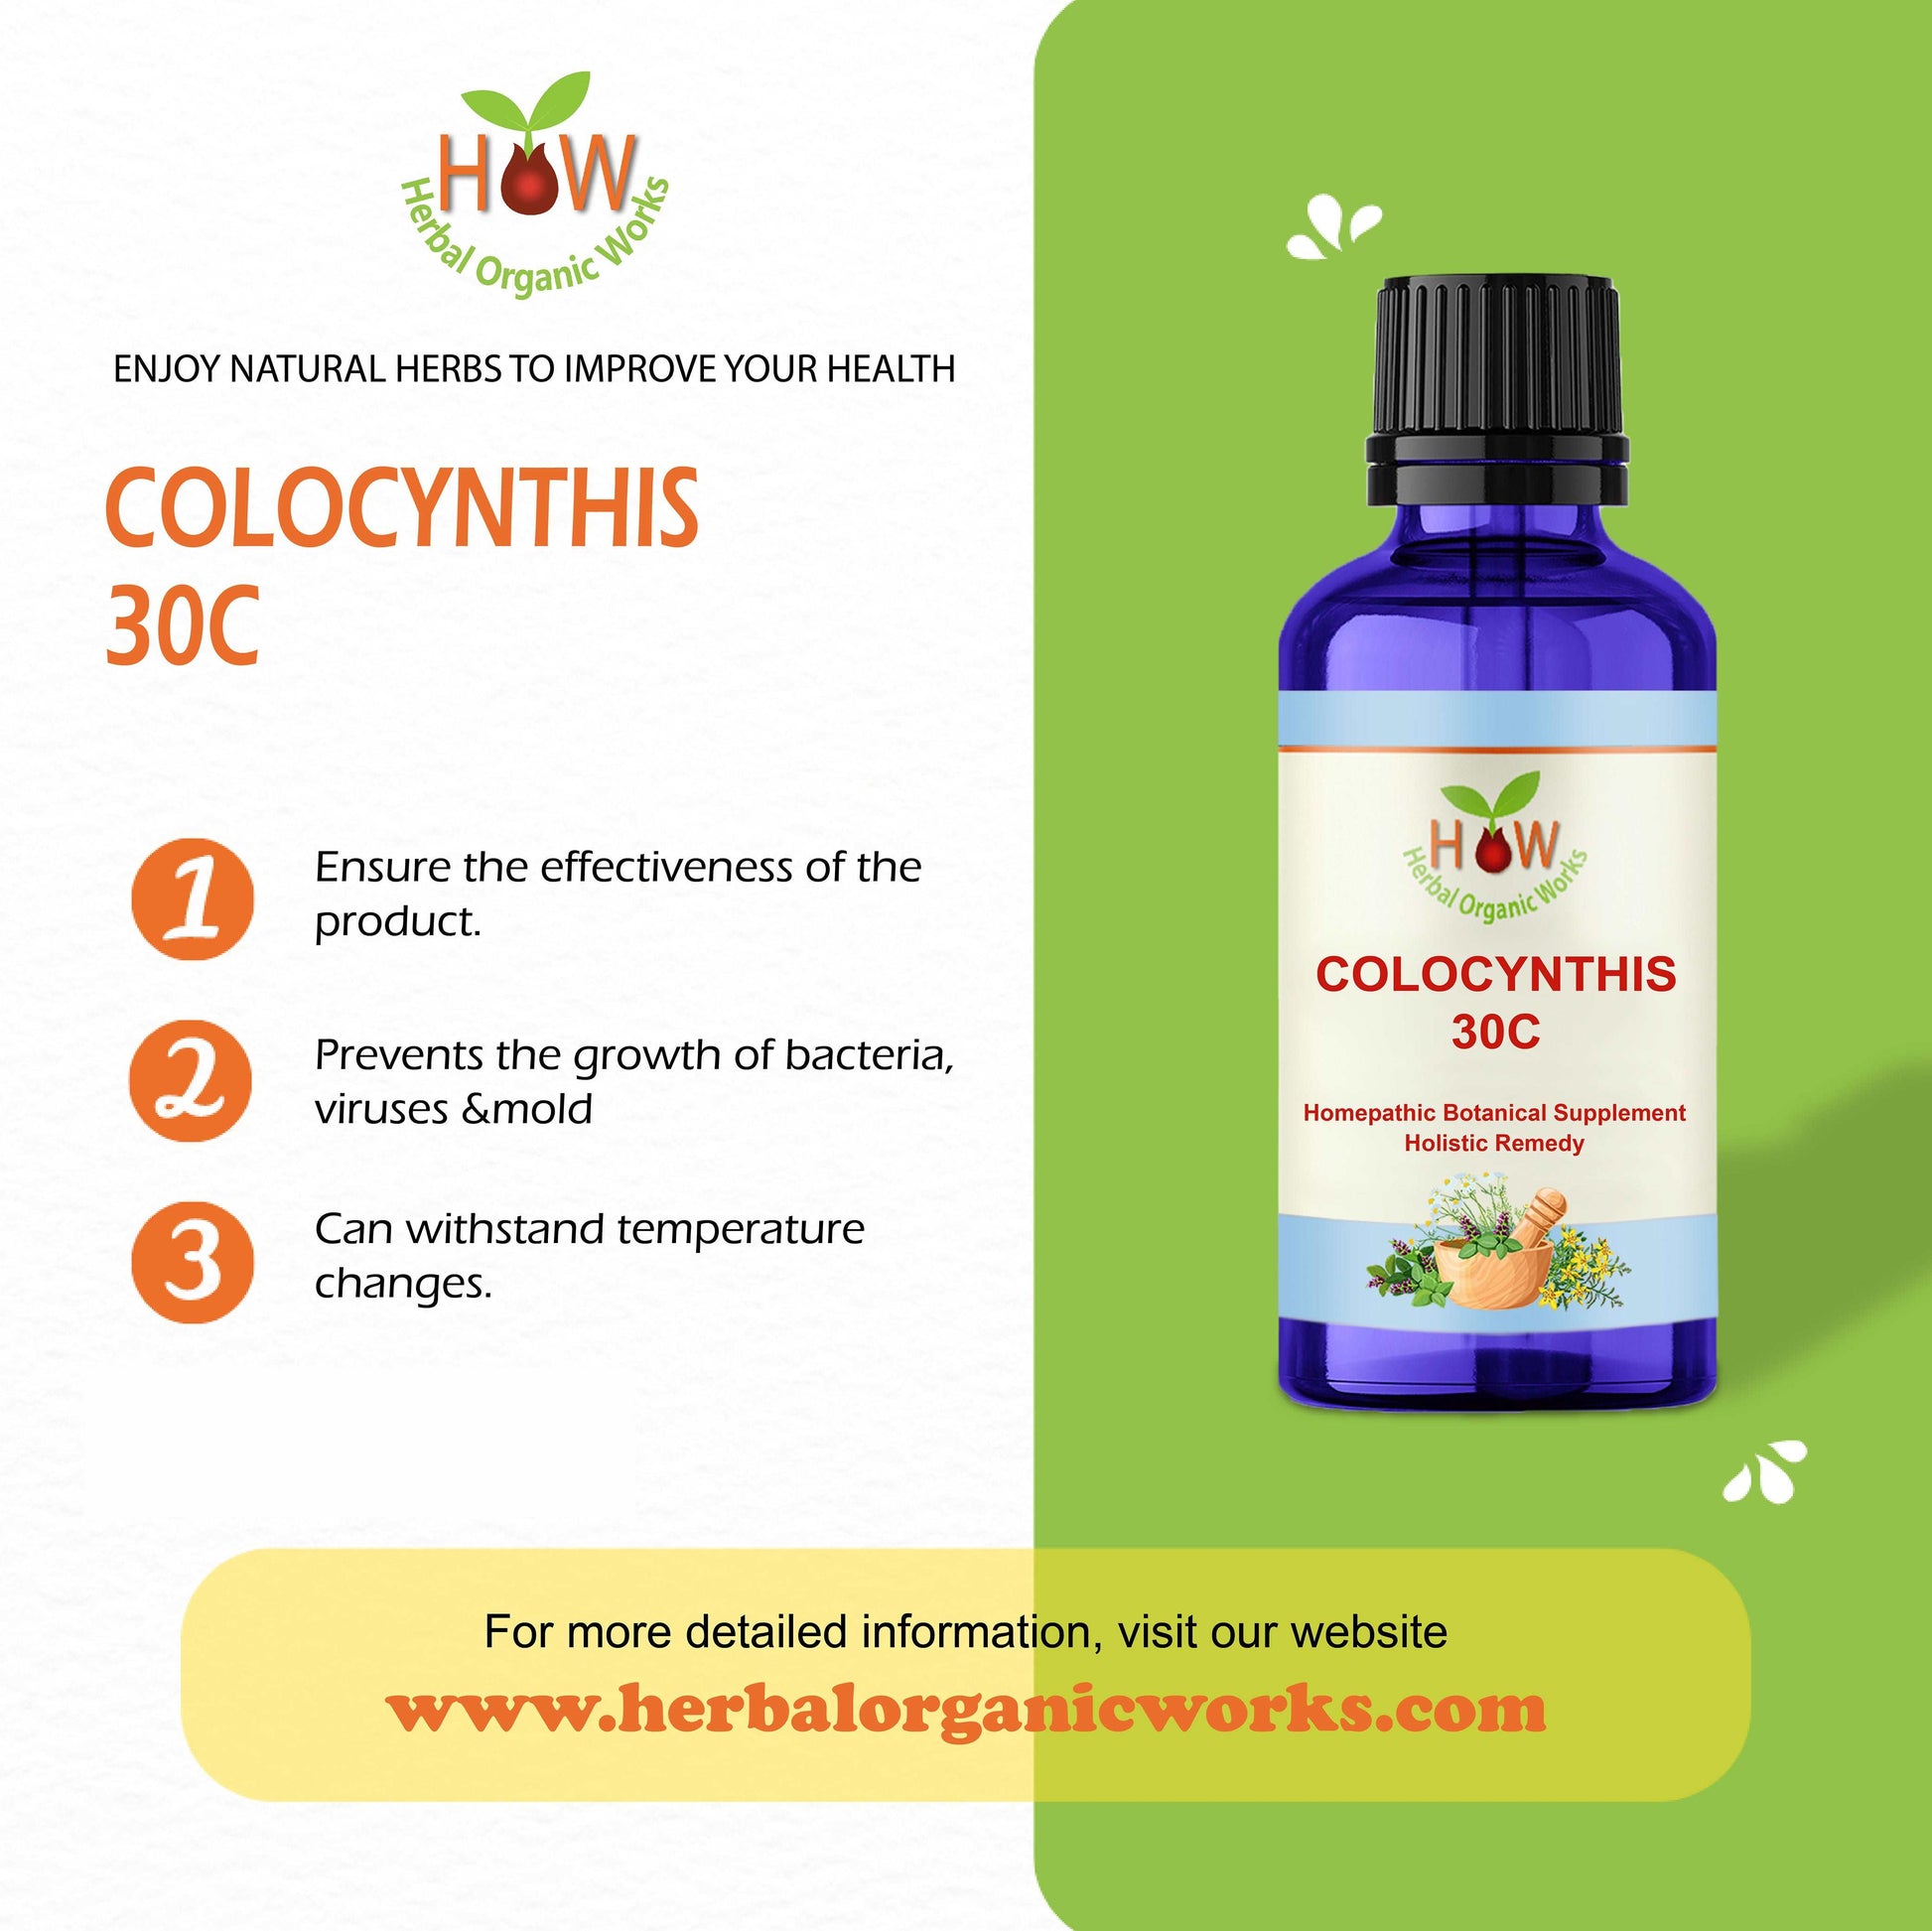 COLOCYNTHIS 30C | PLLS FOR SUPPORT FROM ABDOMINAL PAIN